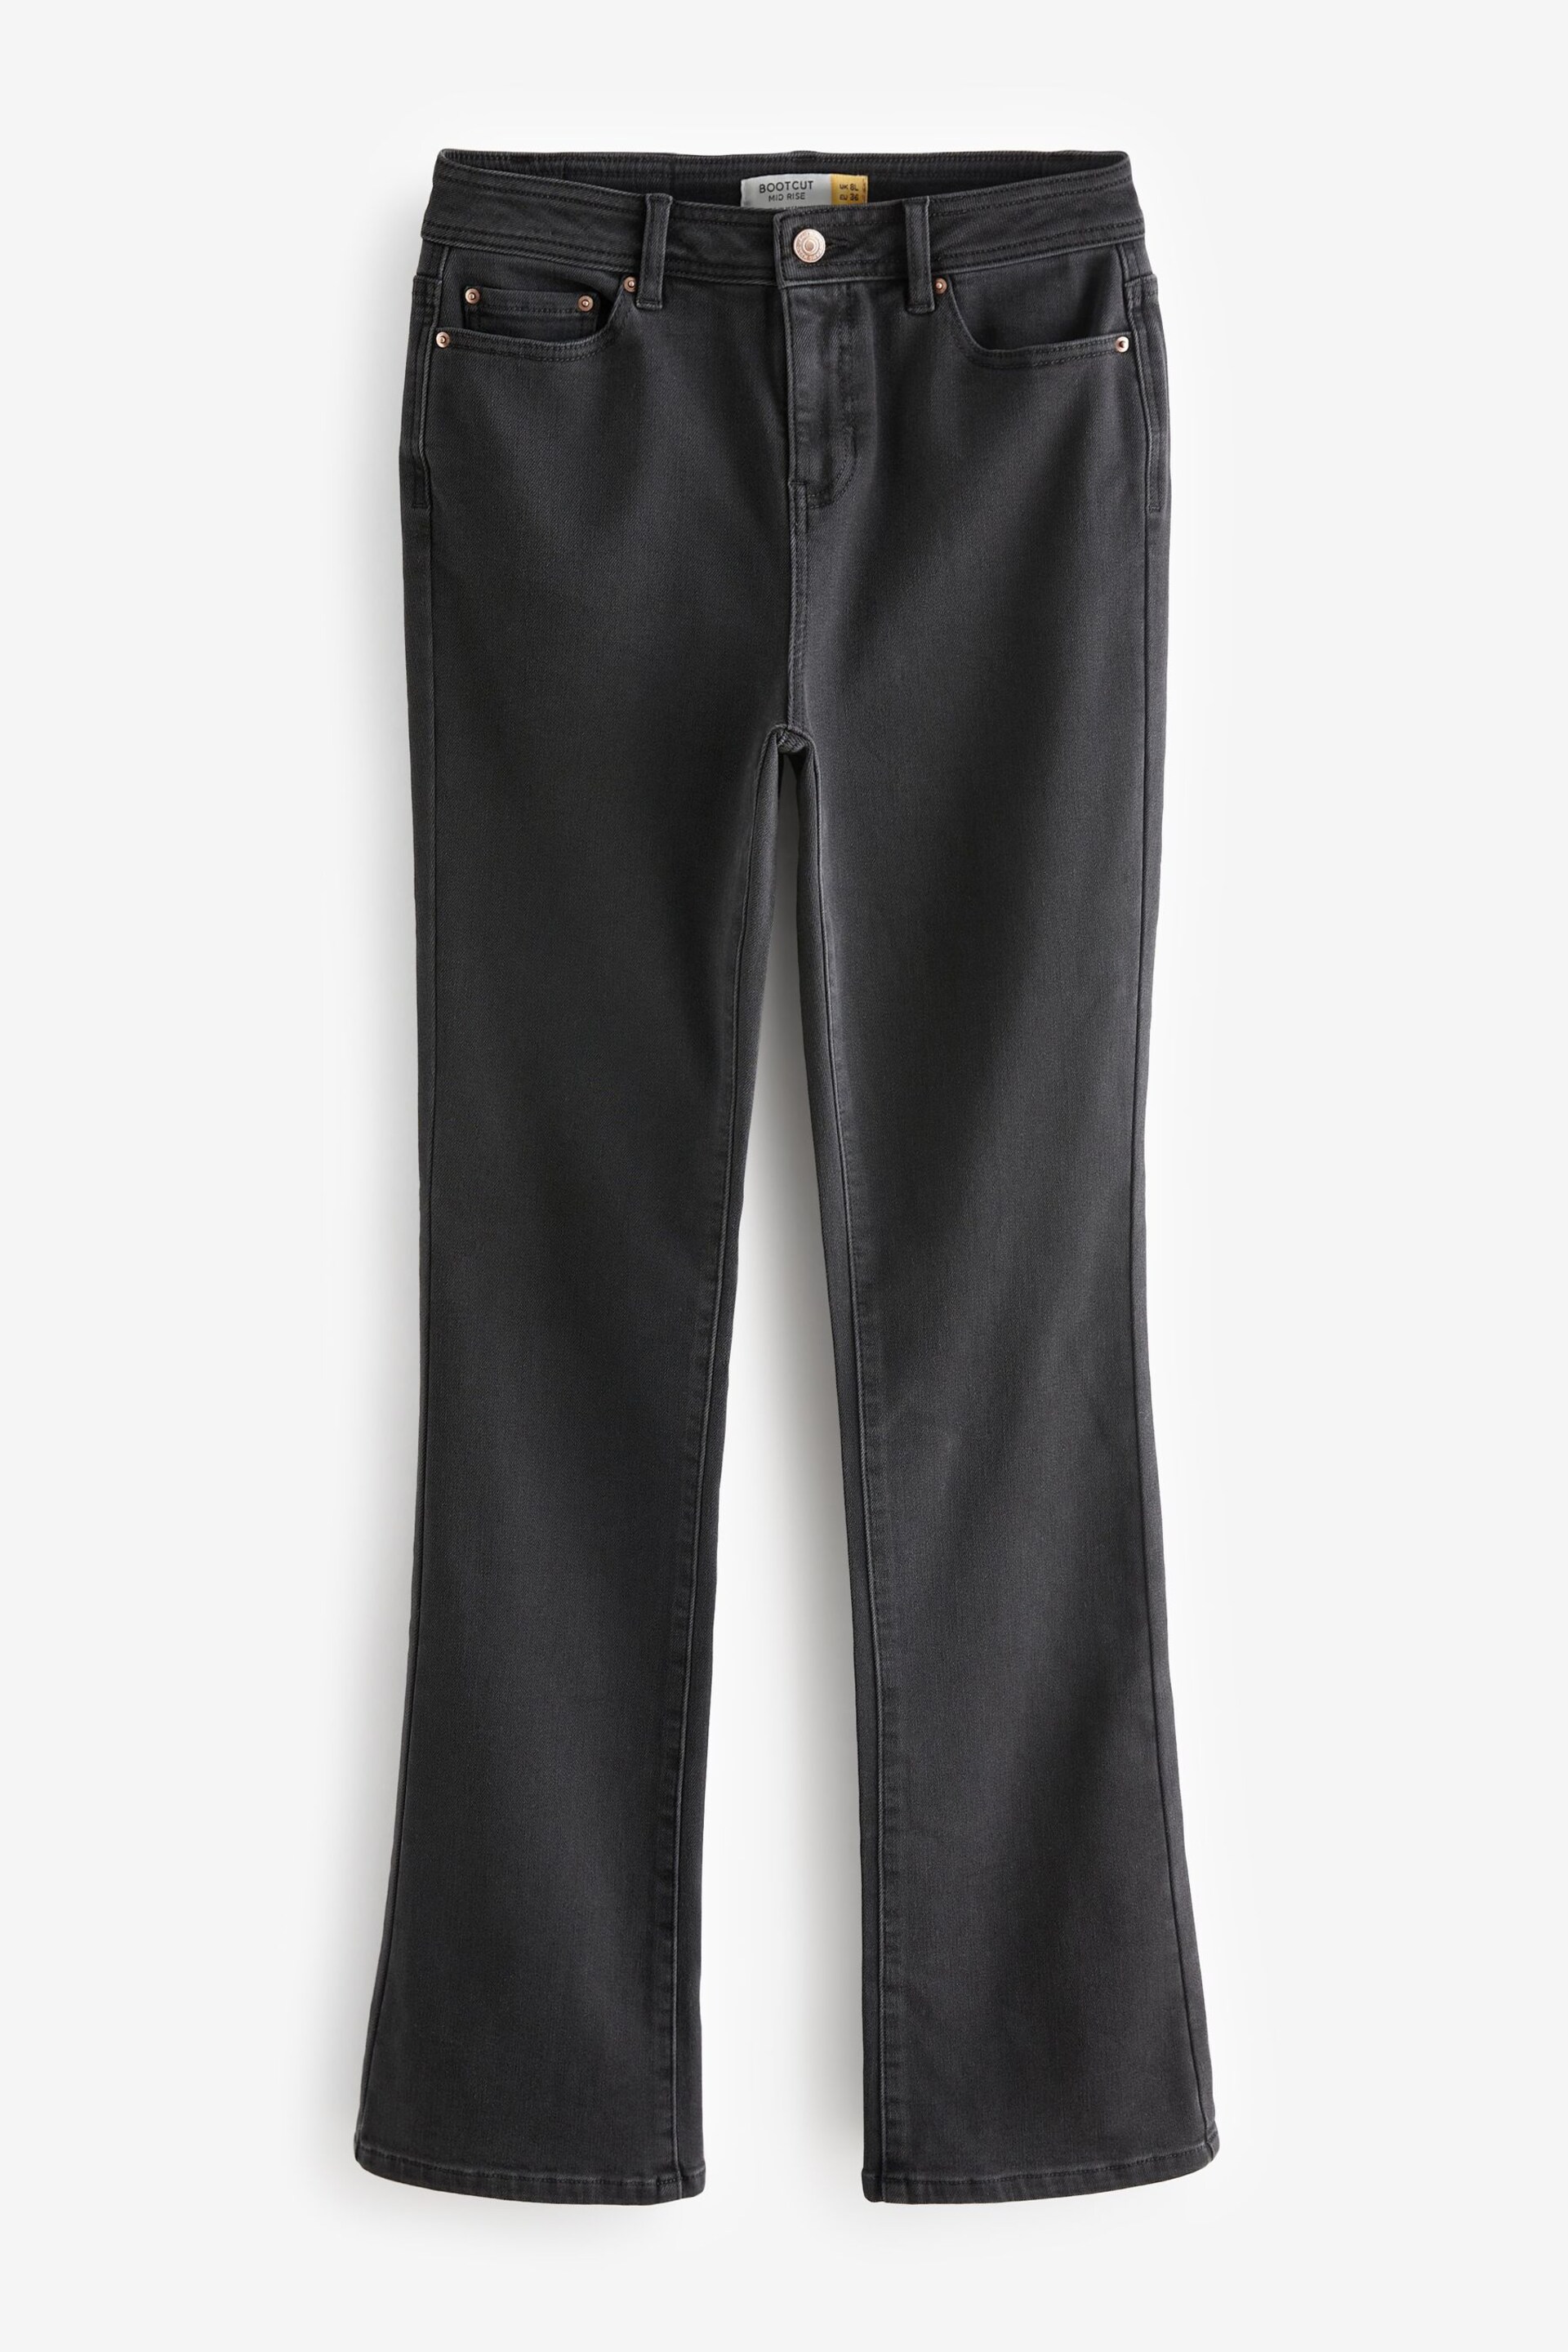 Washed Black Cosy Brushed Bootcut Jeans - Image 6 of 10